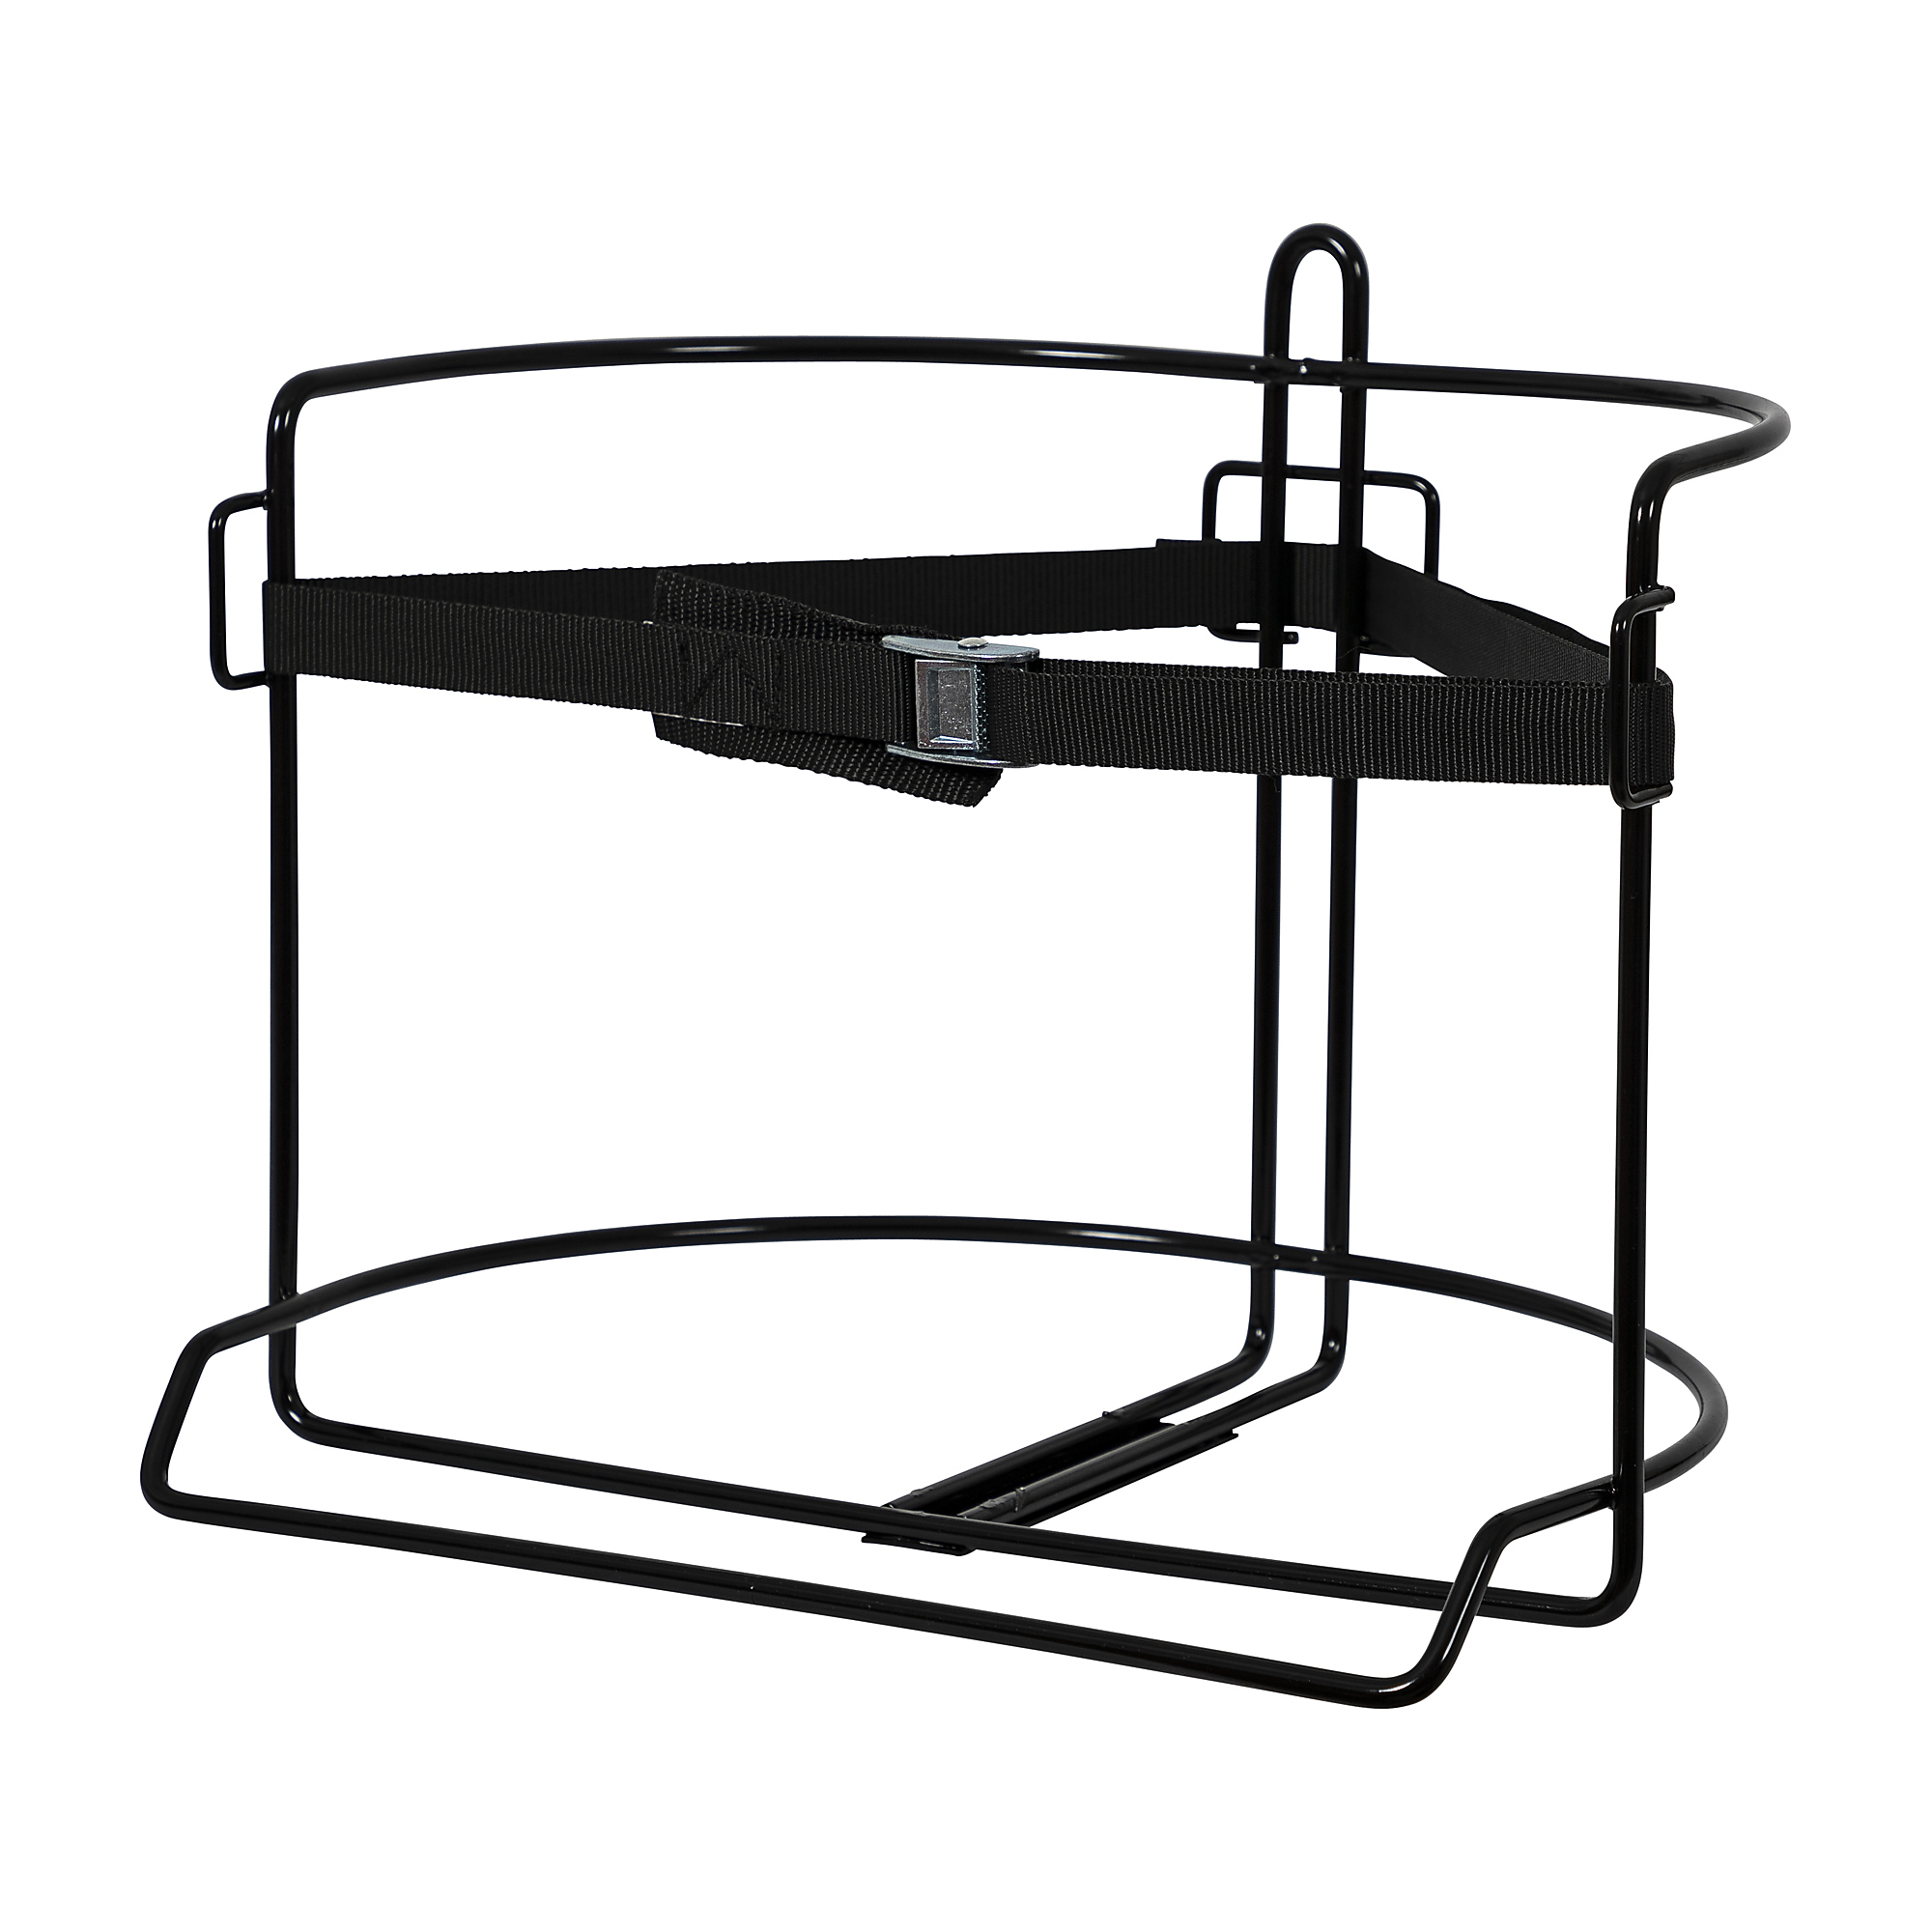 Buyers Products, 5 Gallon Wire Form Water Cooler Rack, Shelves (qty.) 0 Material Carbon Steel, Model 5201007